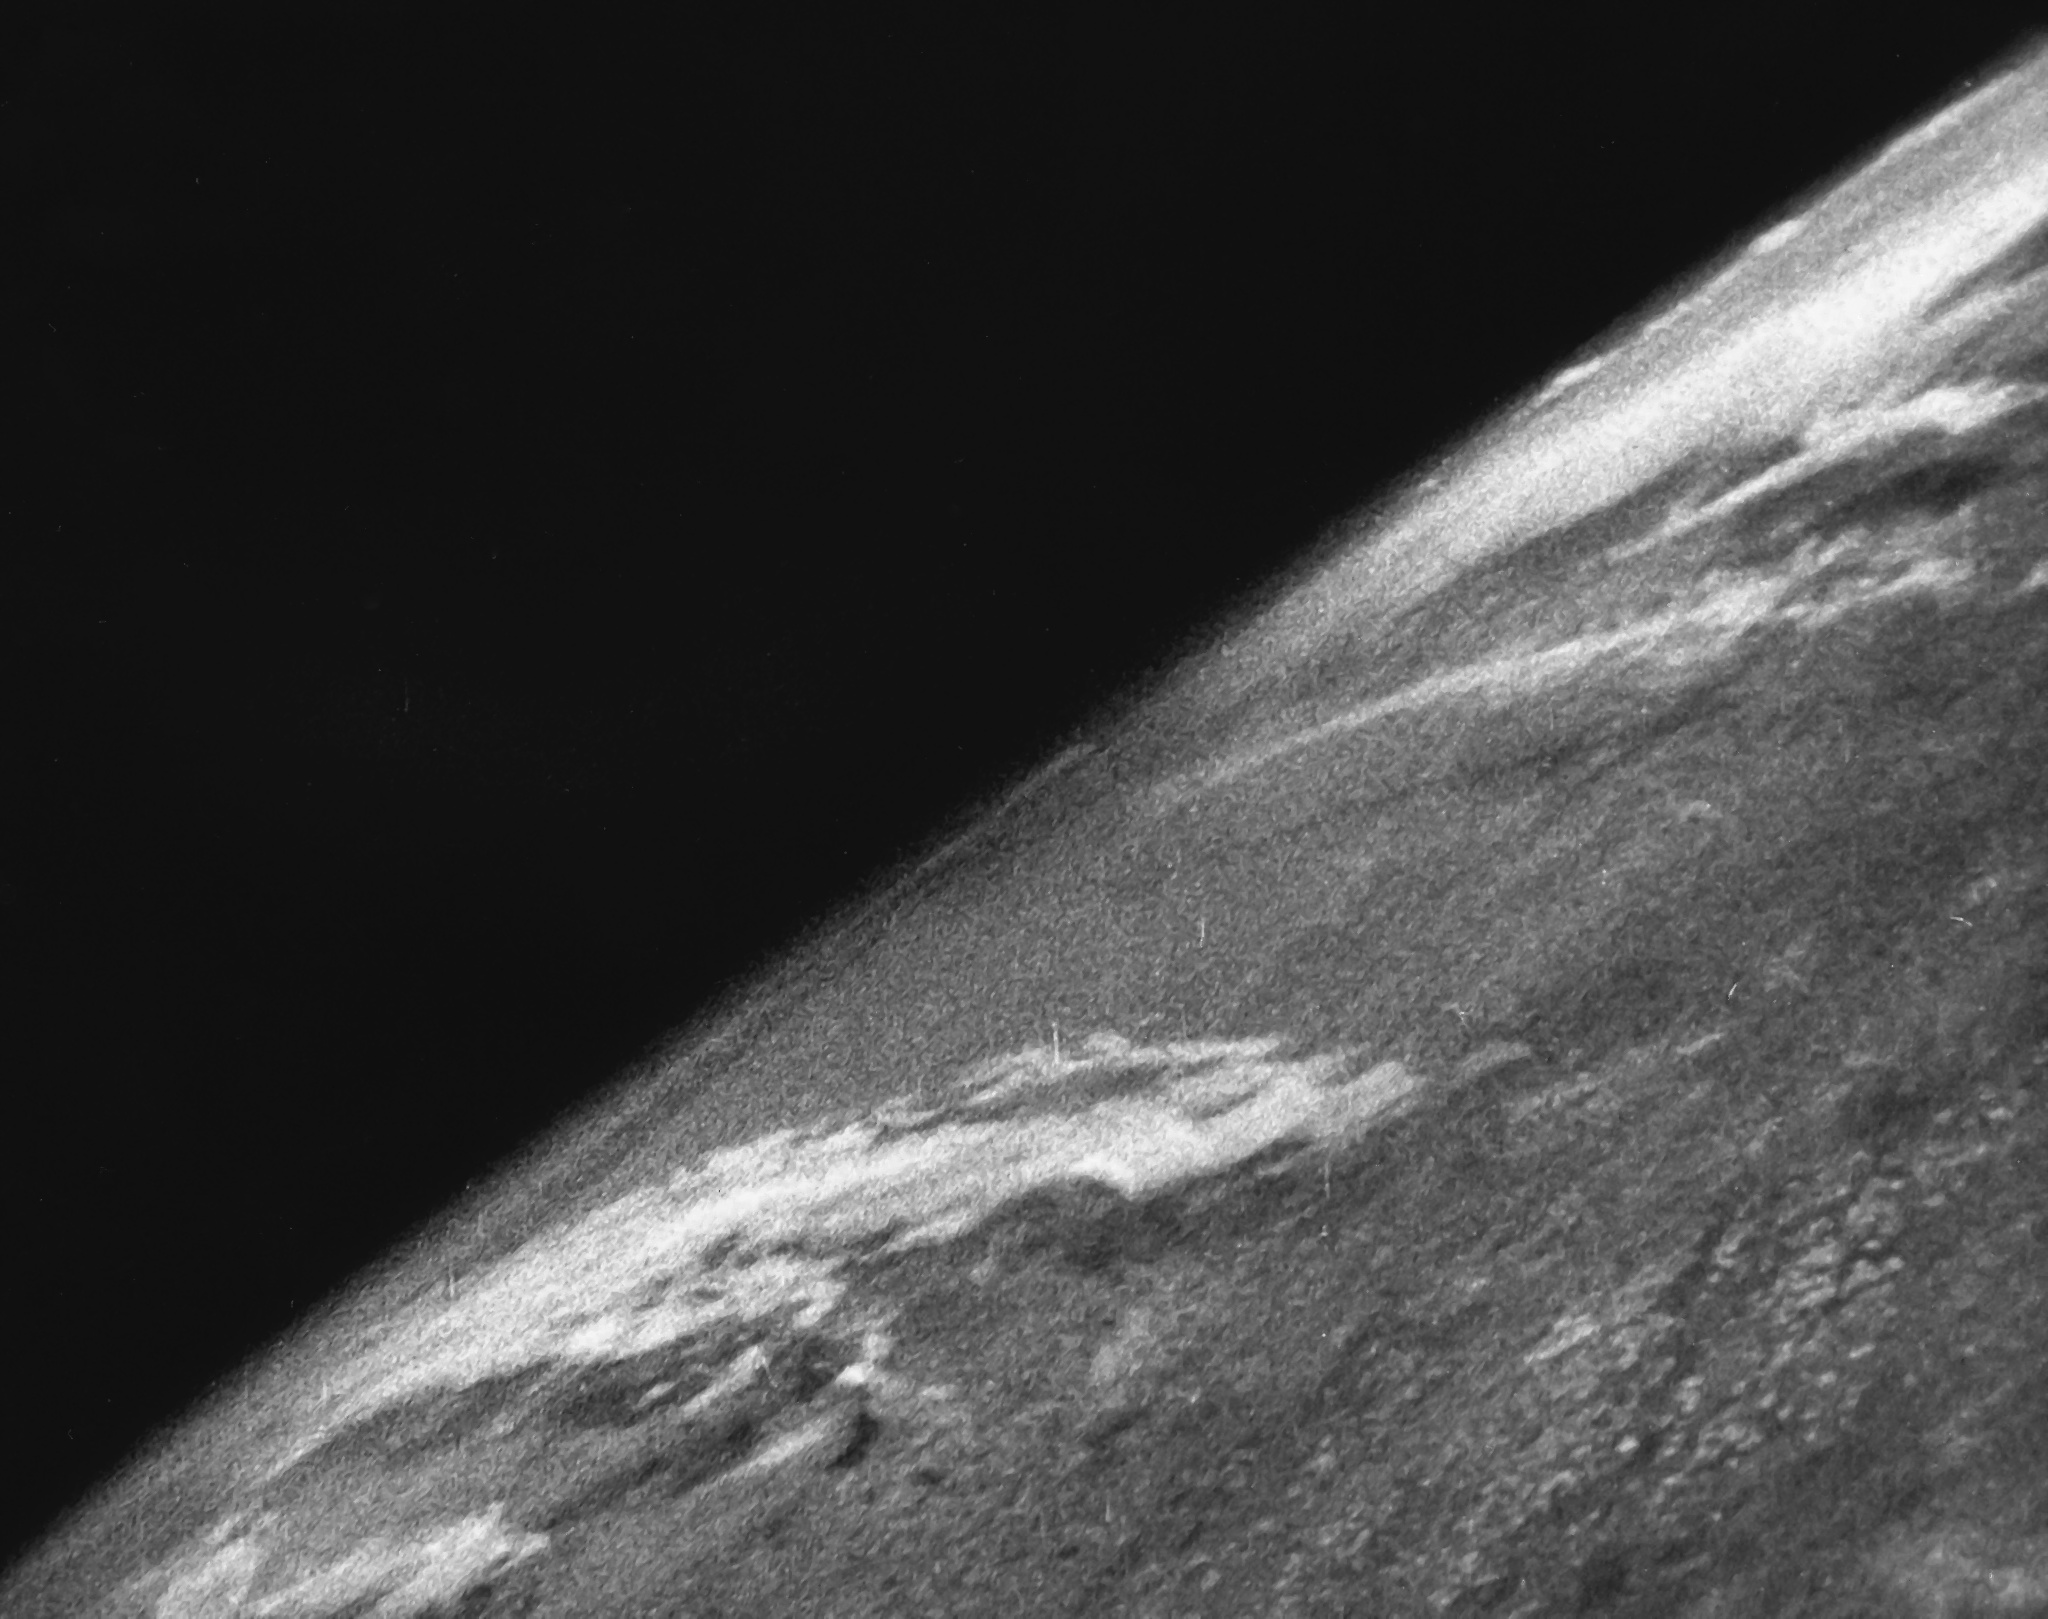 1946: The First Photo of Earth from Space was Taken by a Nazi V-2 Rocket